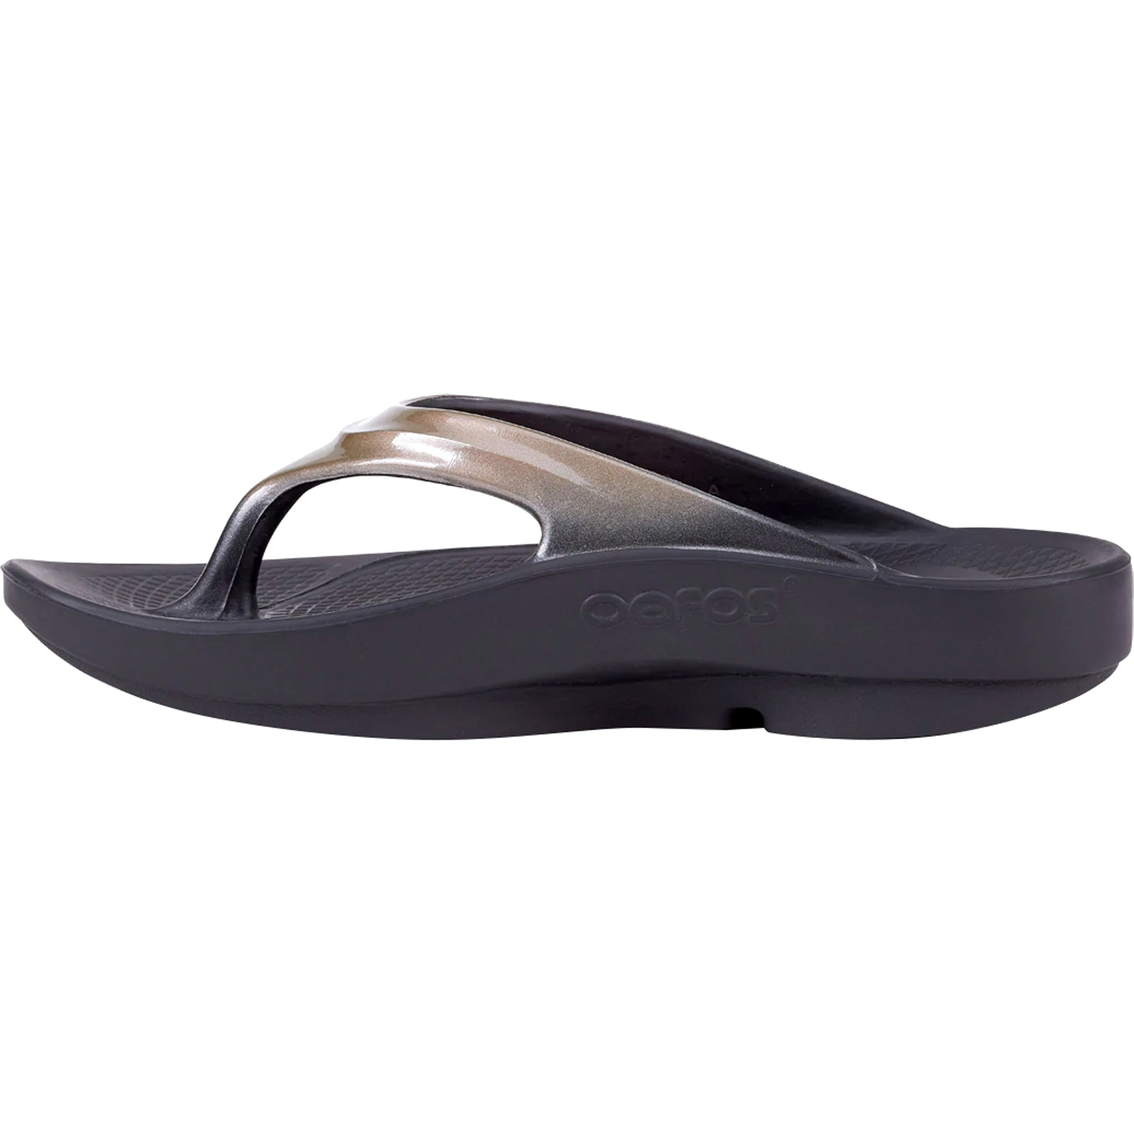 Oofos Women's Oolala Luxe Thong Sandals - Image 3 of 7